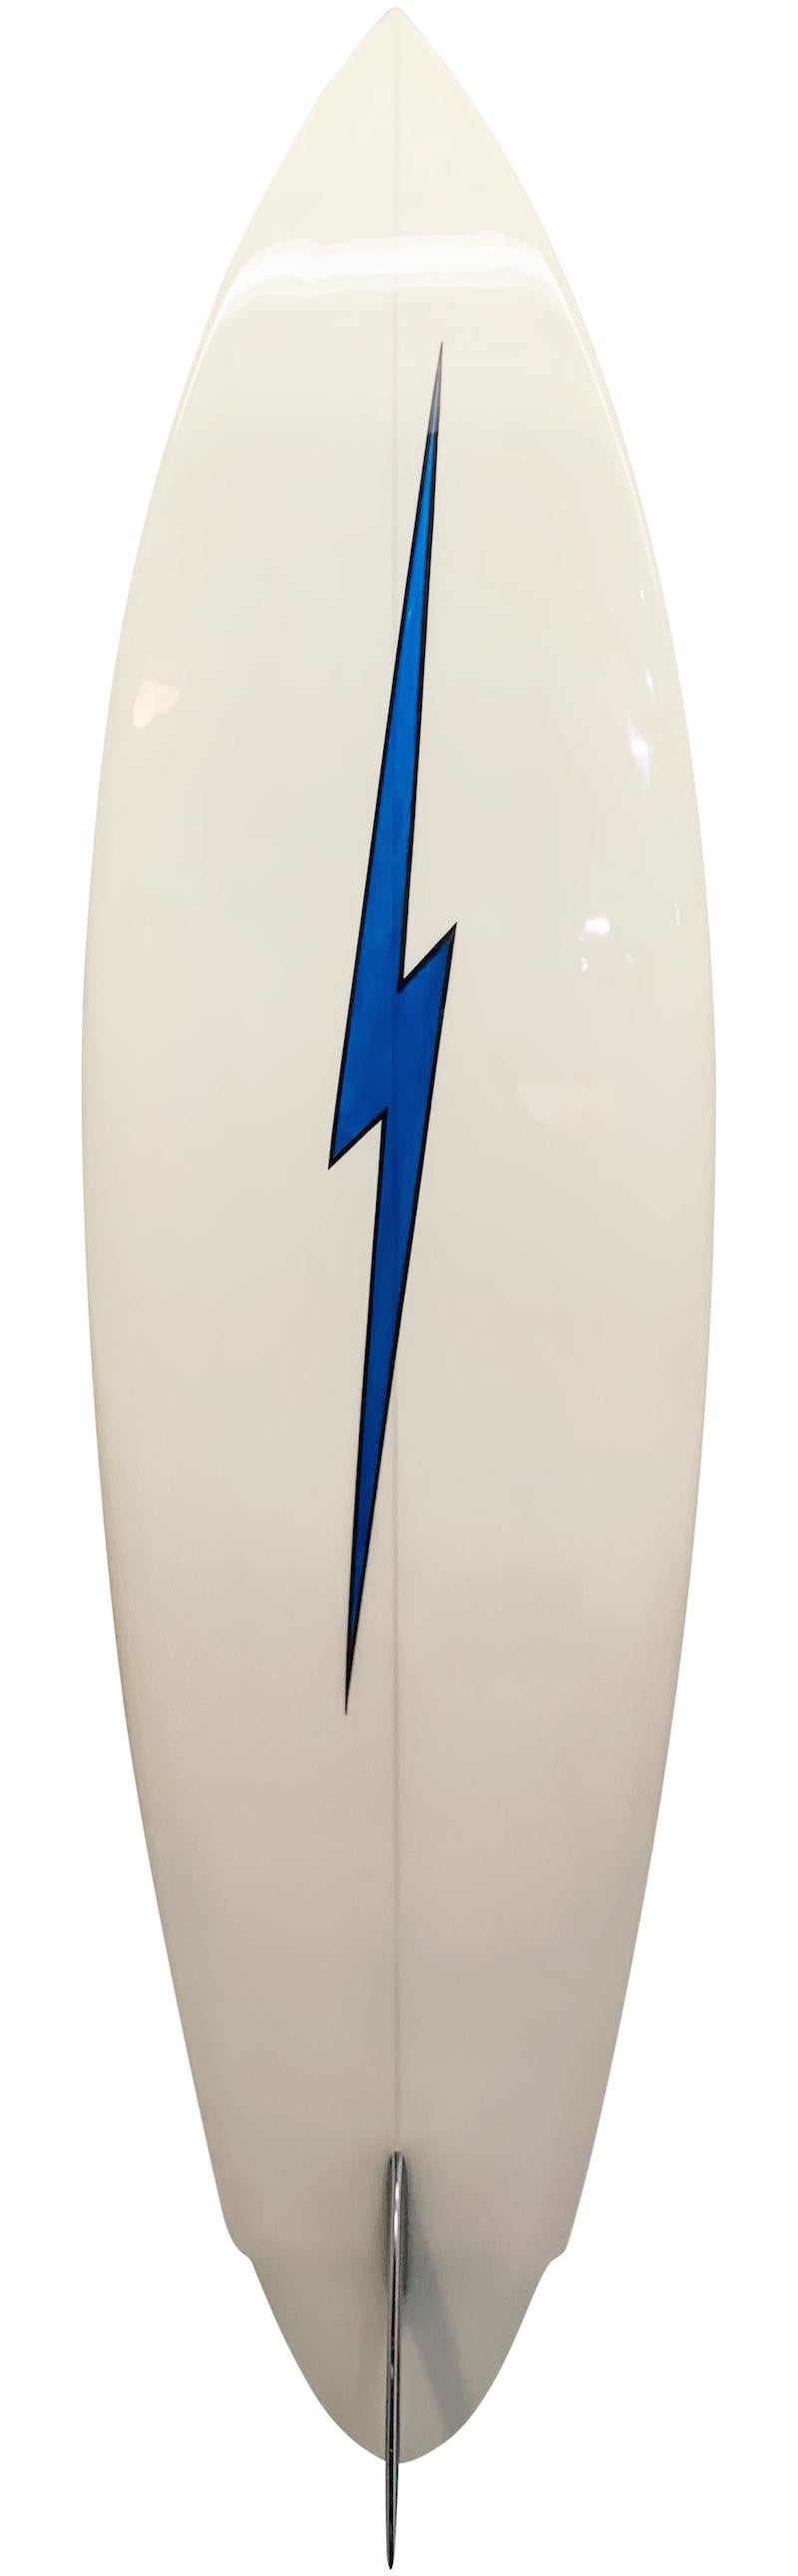 Early 1970s vintage lightning bolt surfboard shaped by Barry Kanaiaupuni. Featuring a winged pintail design with glassed on single fin. Restored to original condition.

Barry Kanaiaupuni is best known for his dominance at one of Hawaii's premiere